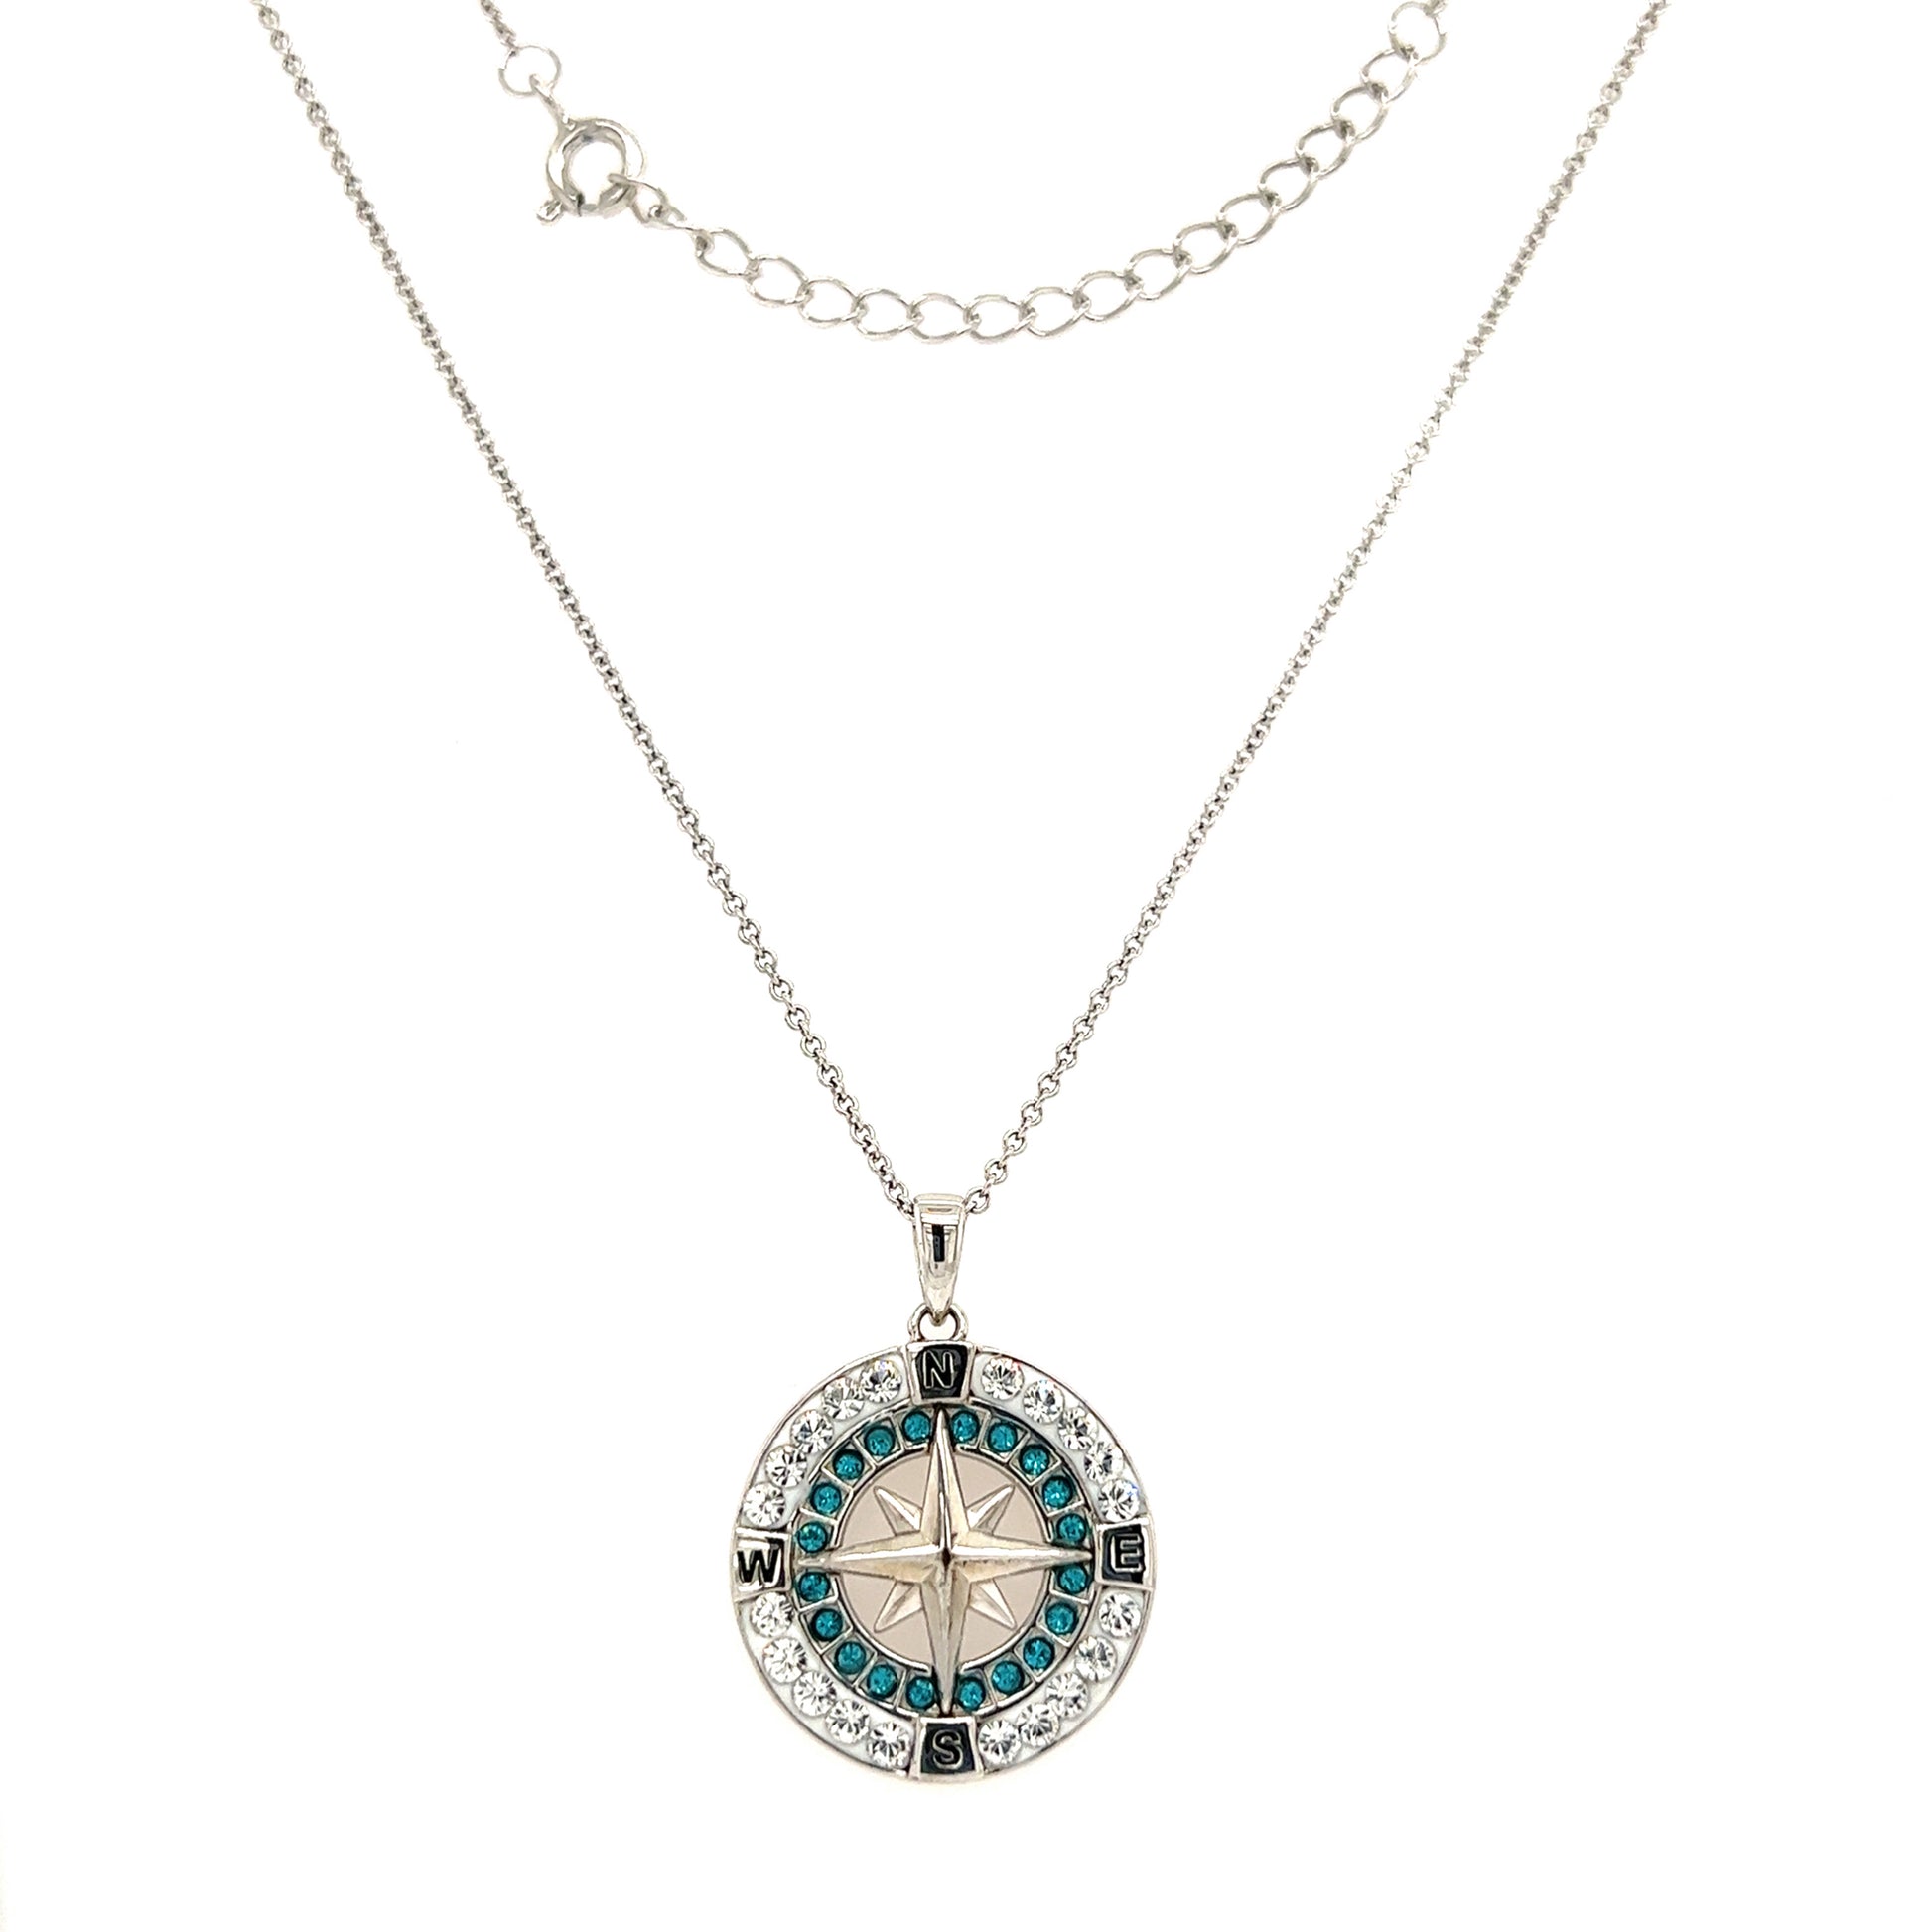 Compass Necklace with Aqua and White Crystals in Sterling Silver Front necklace View